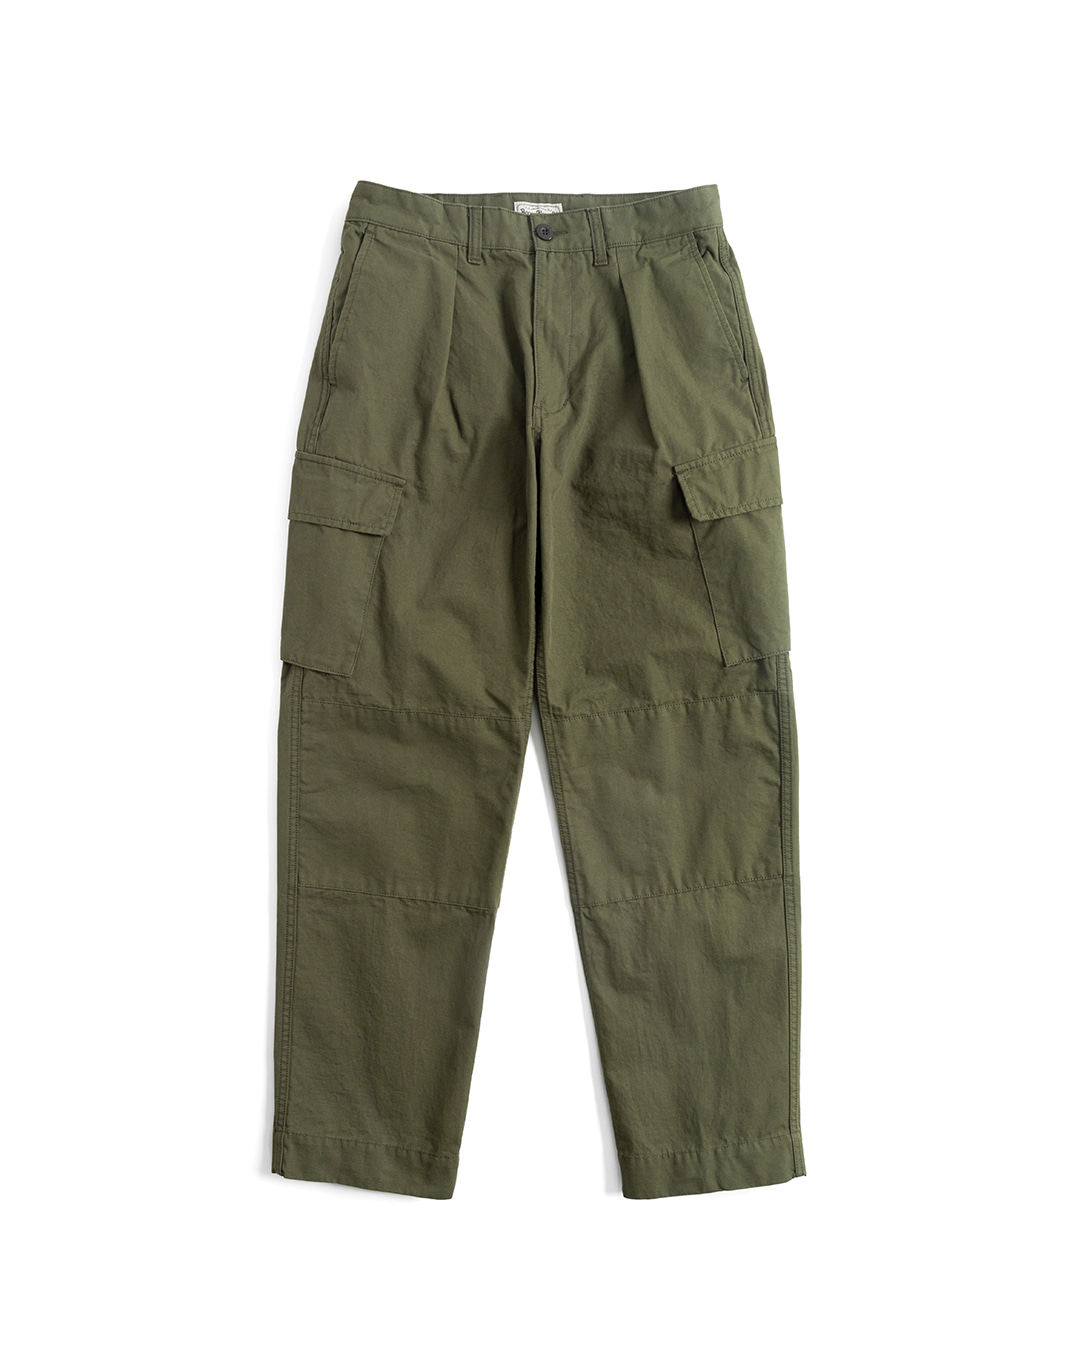 09 MILITARY CARGO PANTS (olive green)